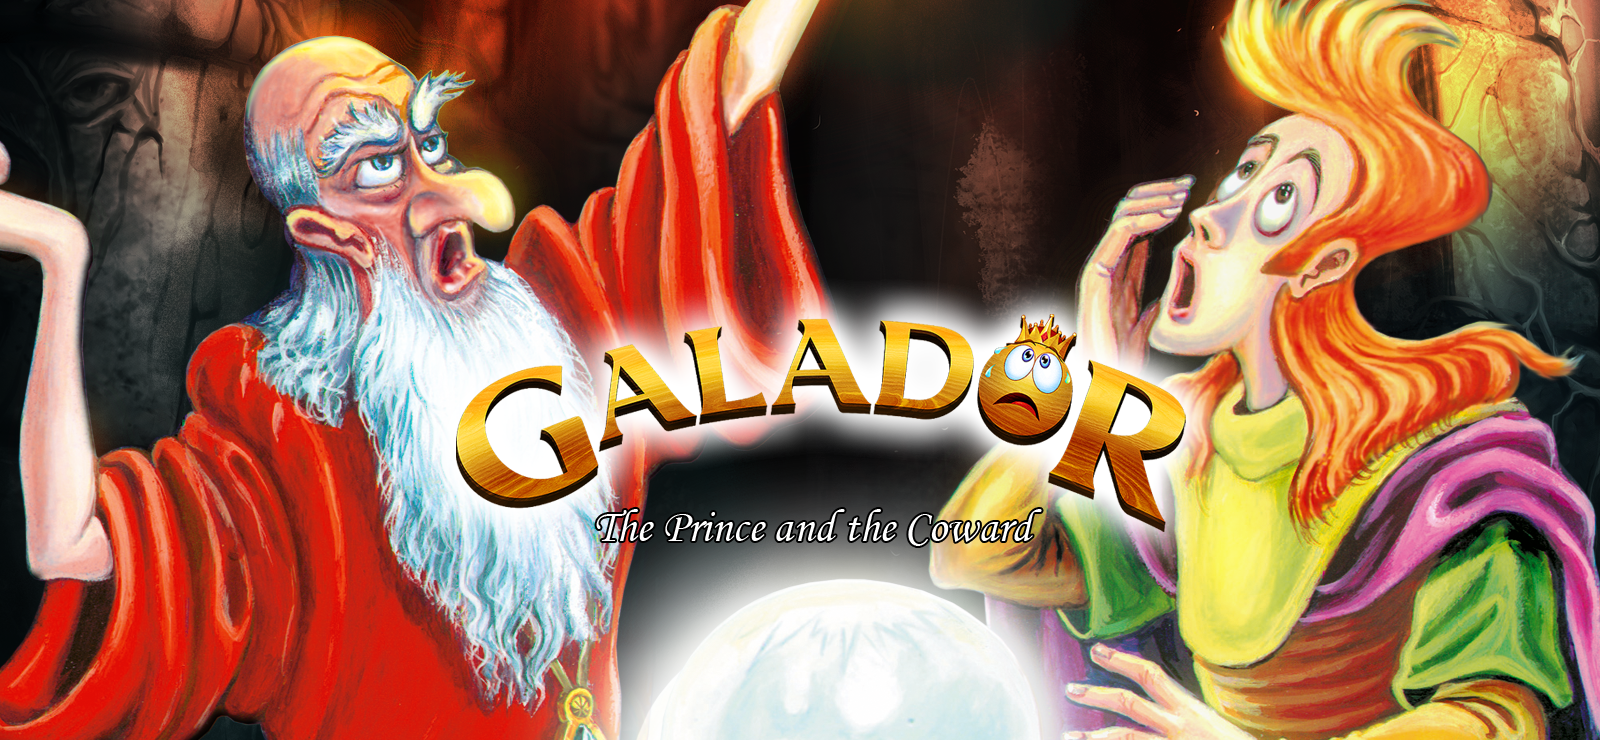 Galador - The Prince And The Coward